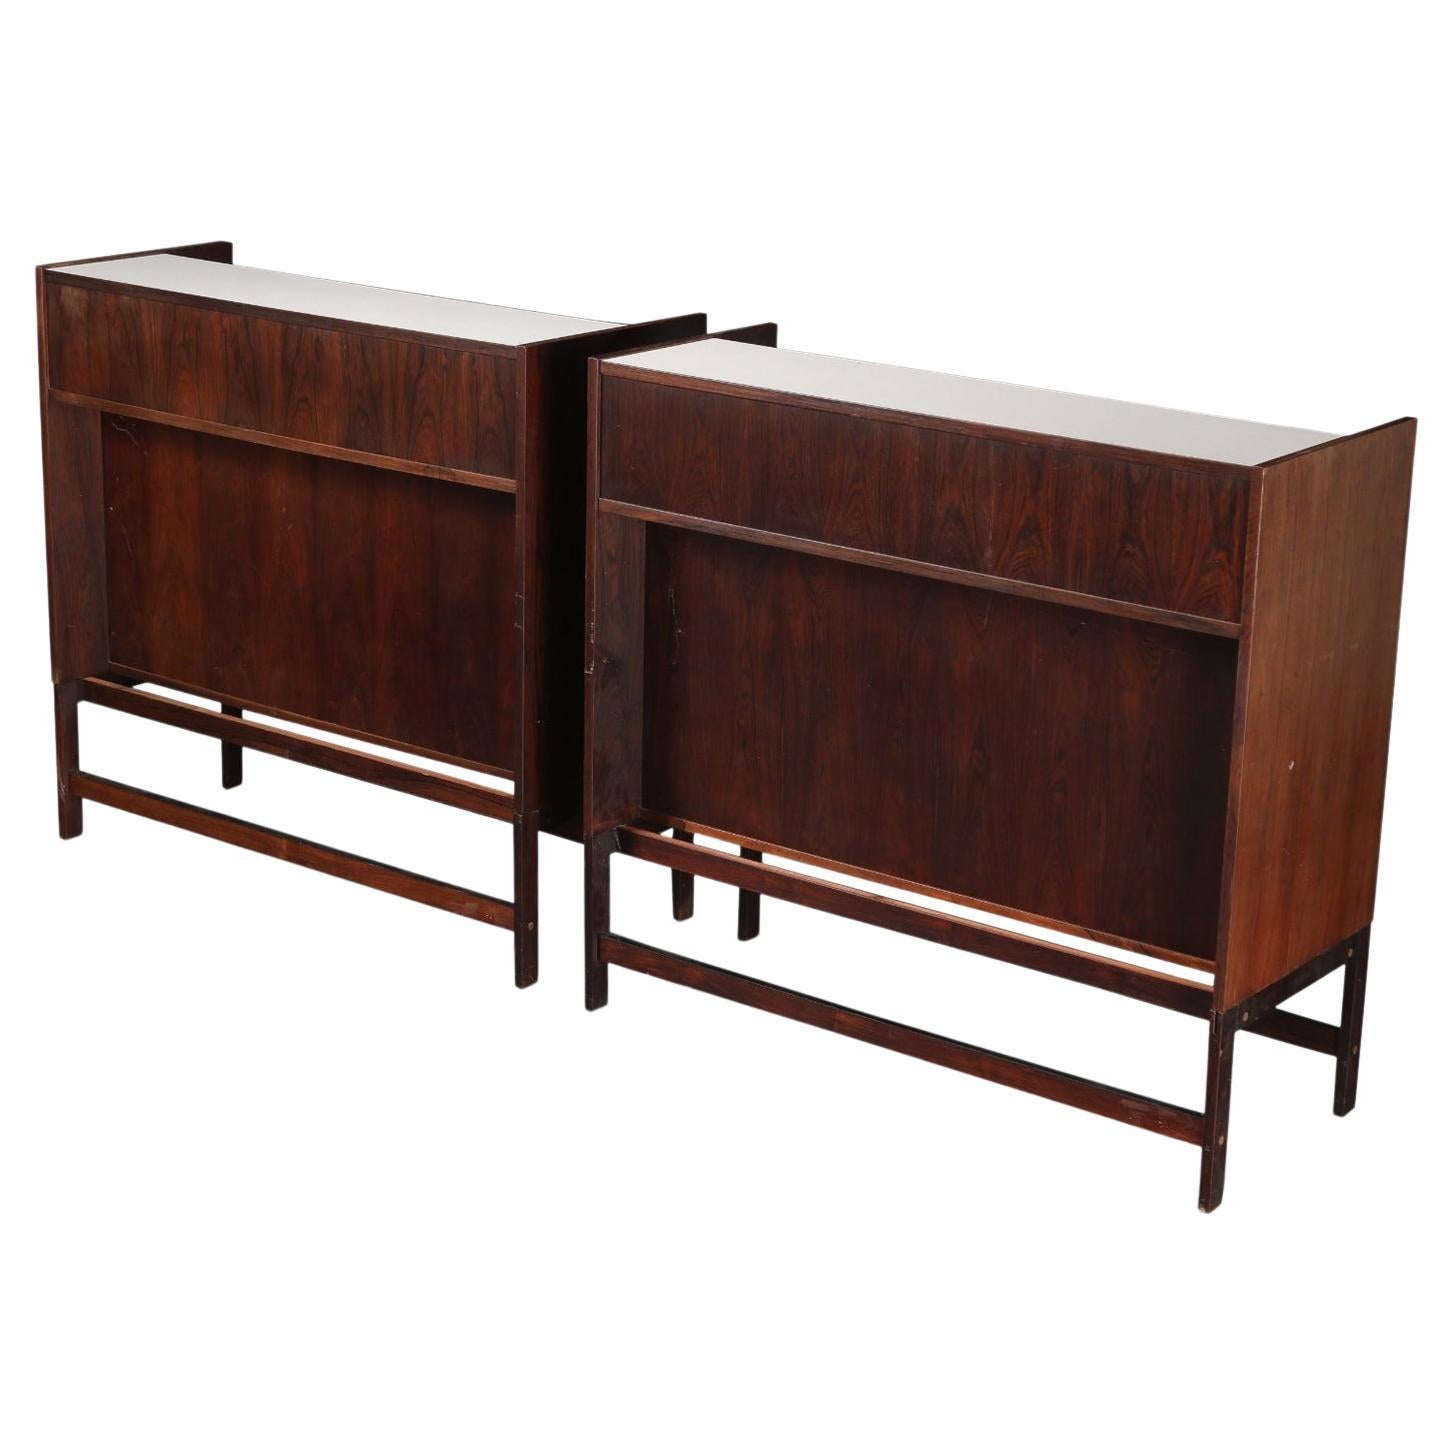 Pair Of Danish Modern Freestanding Cocktail Bars In Rosewood For Sale